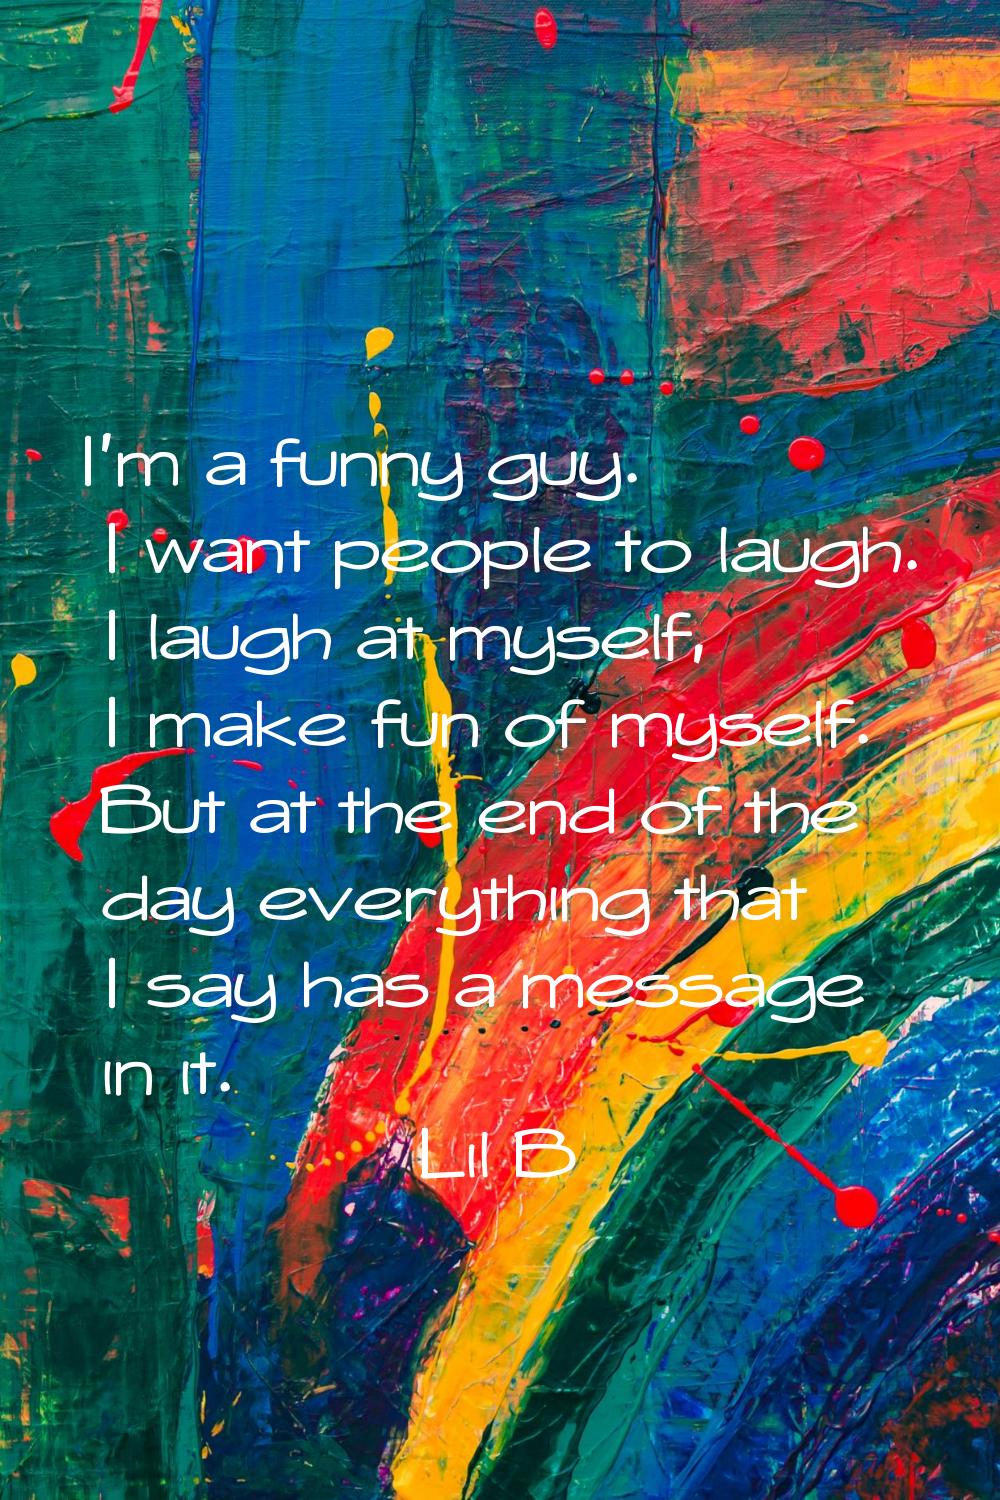 I'm a funny guy. I want people to laugh. I laugh at myself, I make fun of myself. But at the end of